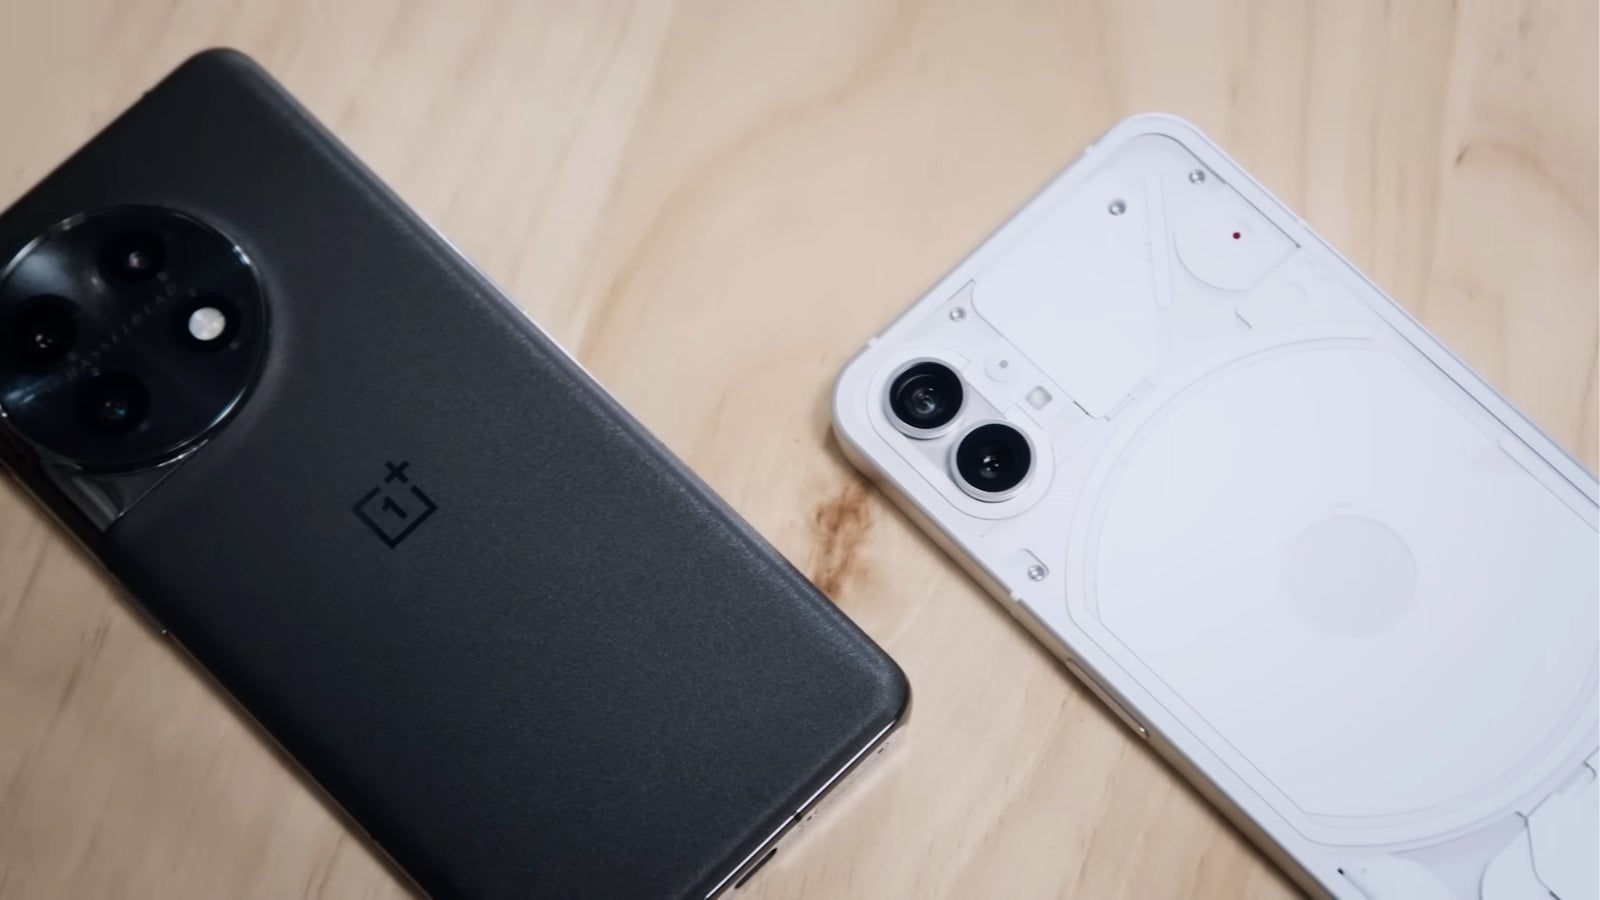 Via YouTube - Carl Pei reviews the OnePlus 11 and compares it to his Nothing Phone (1)